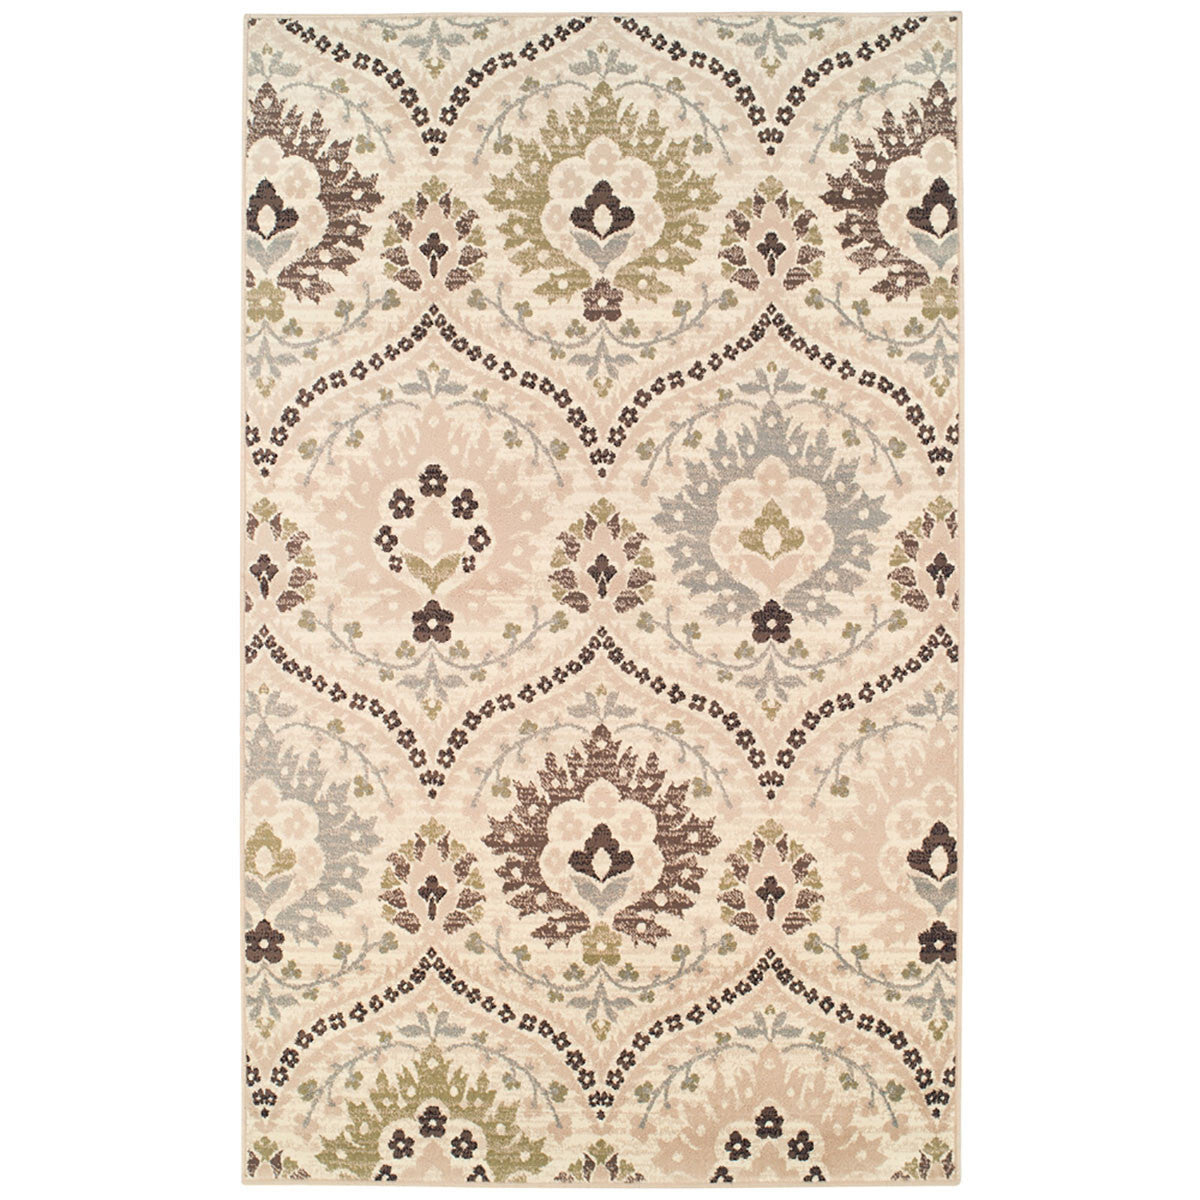 9' X 12' Ivory Floral Power Loom Distressed Stain Resistant Area Rug